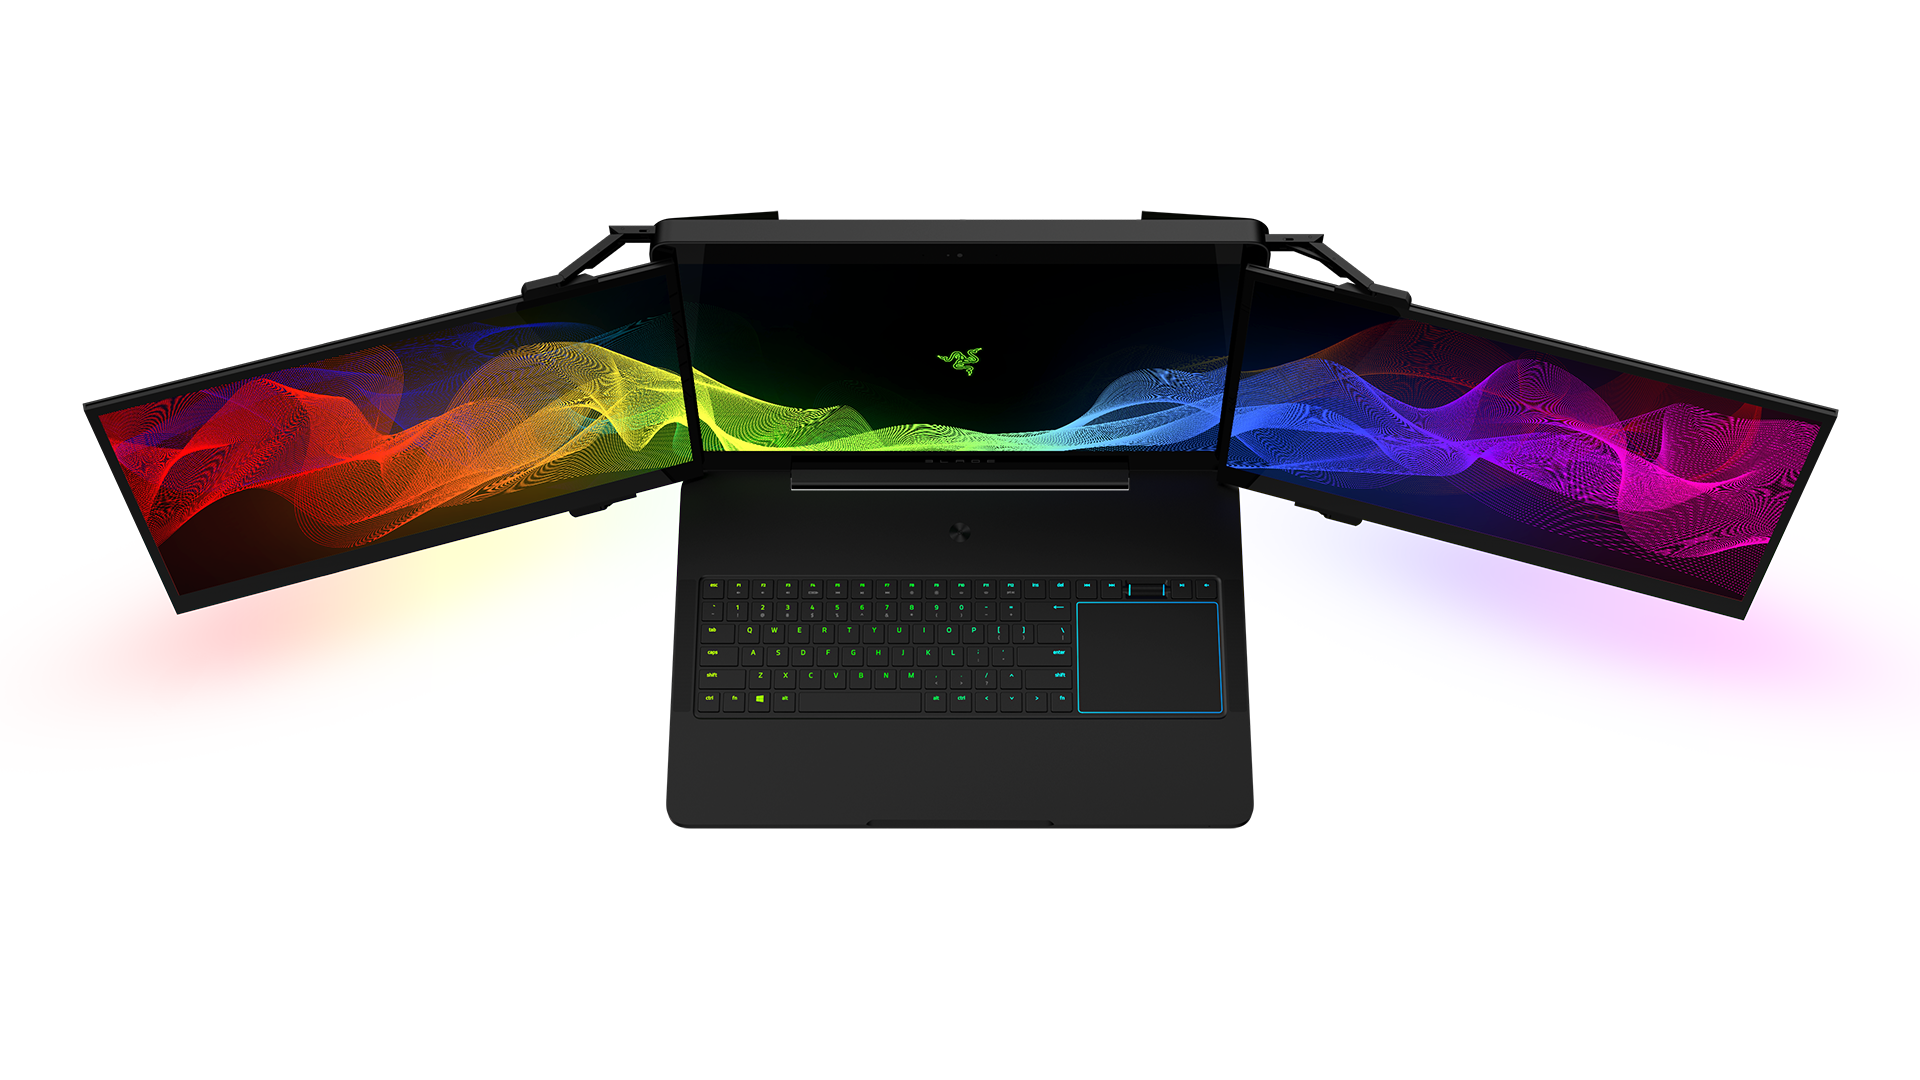 Razer’s Latest CES Showstopper: A Laptop With Three Screens